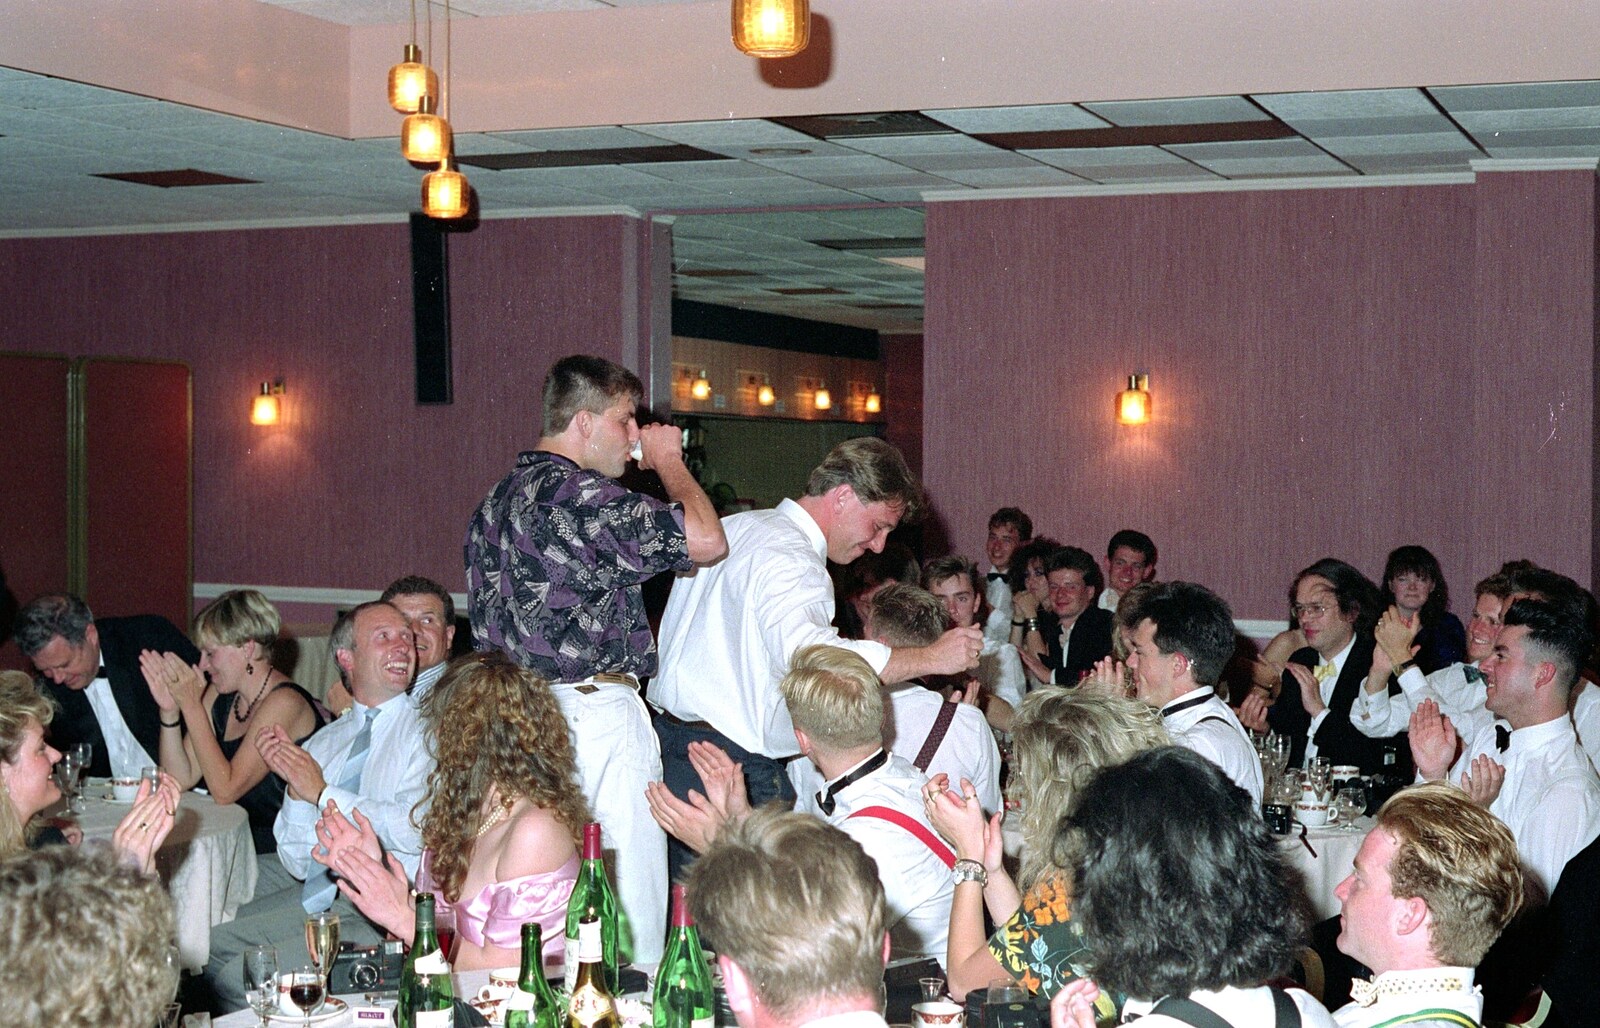 More awards from Uni: The BABS End-of-Course Ball, New Continental Hotel, Plymouth - 21st June 1989